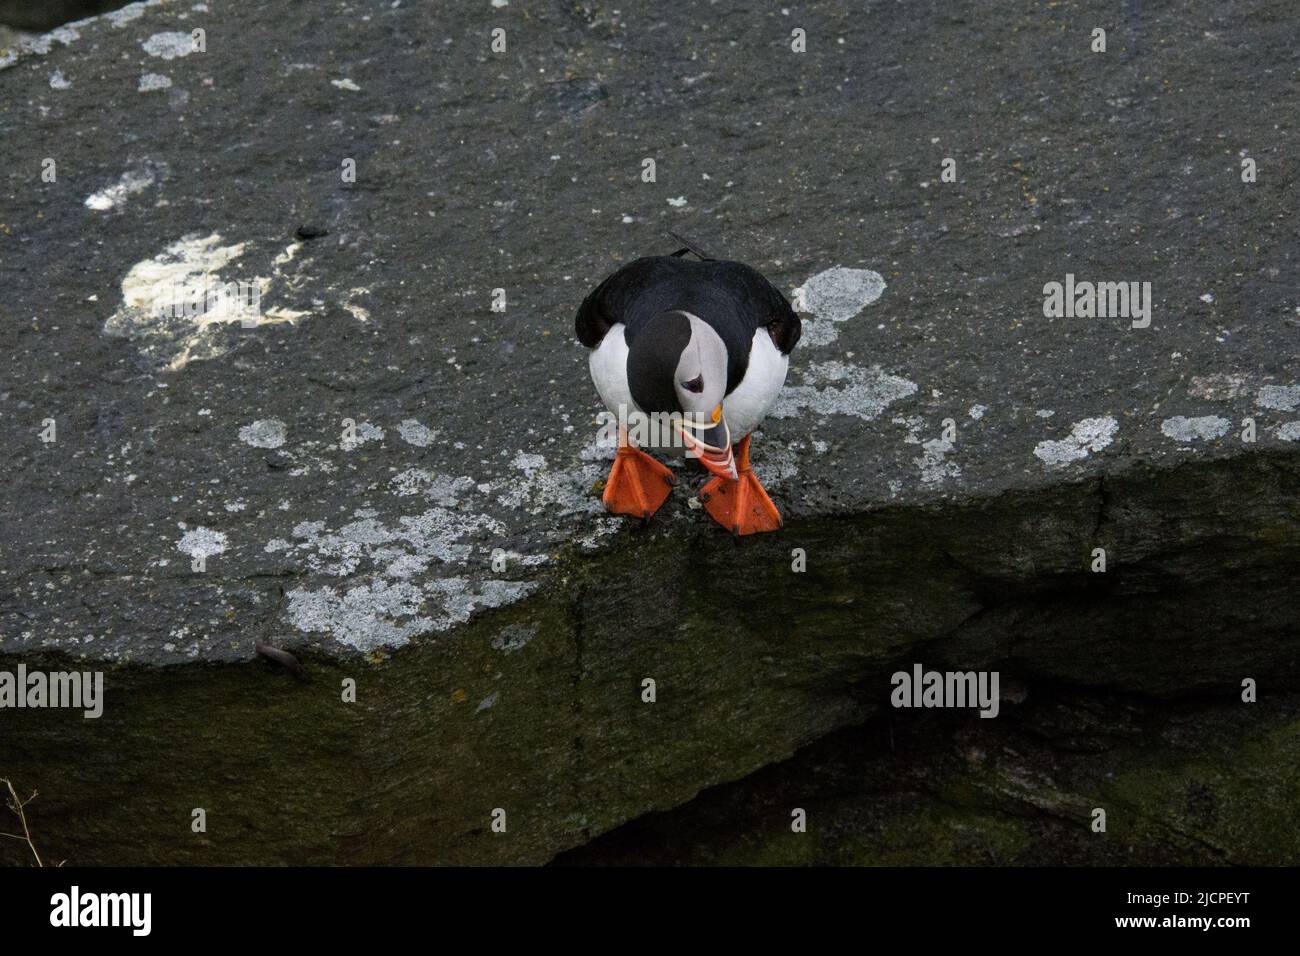 Atlantic Puffin on nesting site at Runde island at the West coast of Norway in the Norwegian Sea. Stock Photo